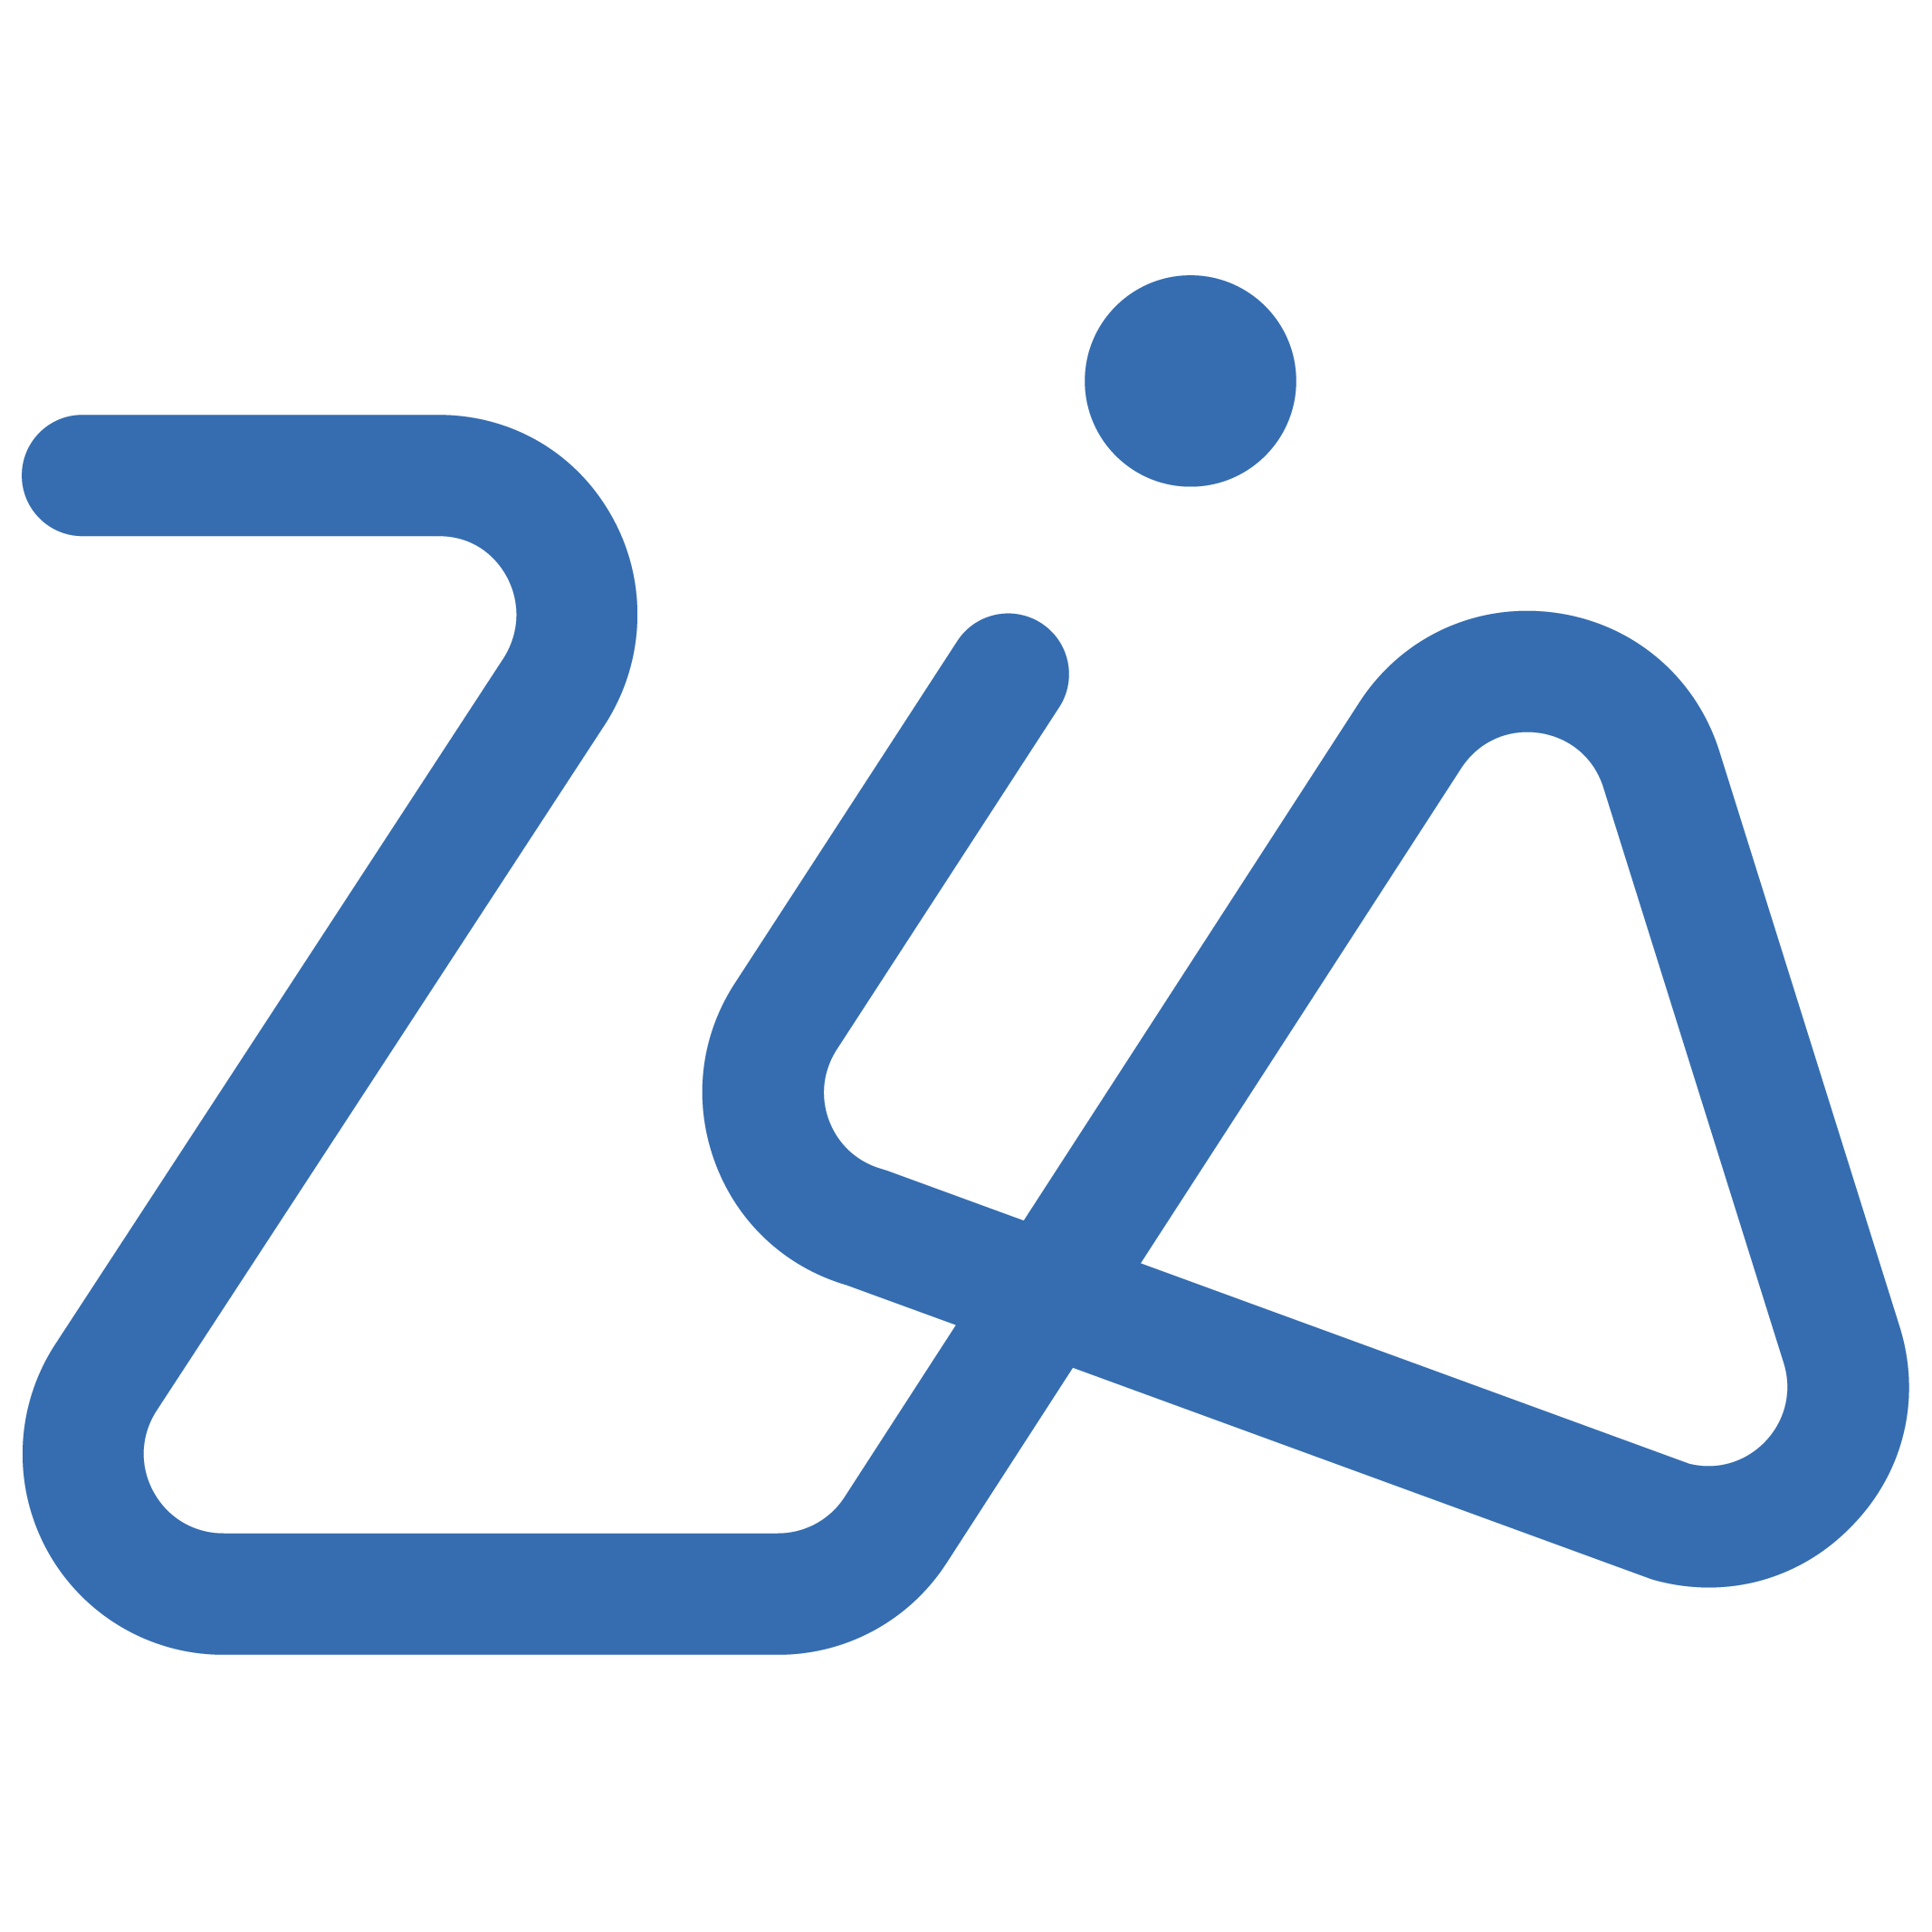 Zia's integration with ChatGPT Zoho's generative AI assistant